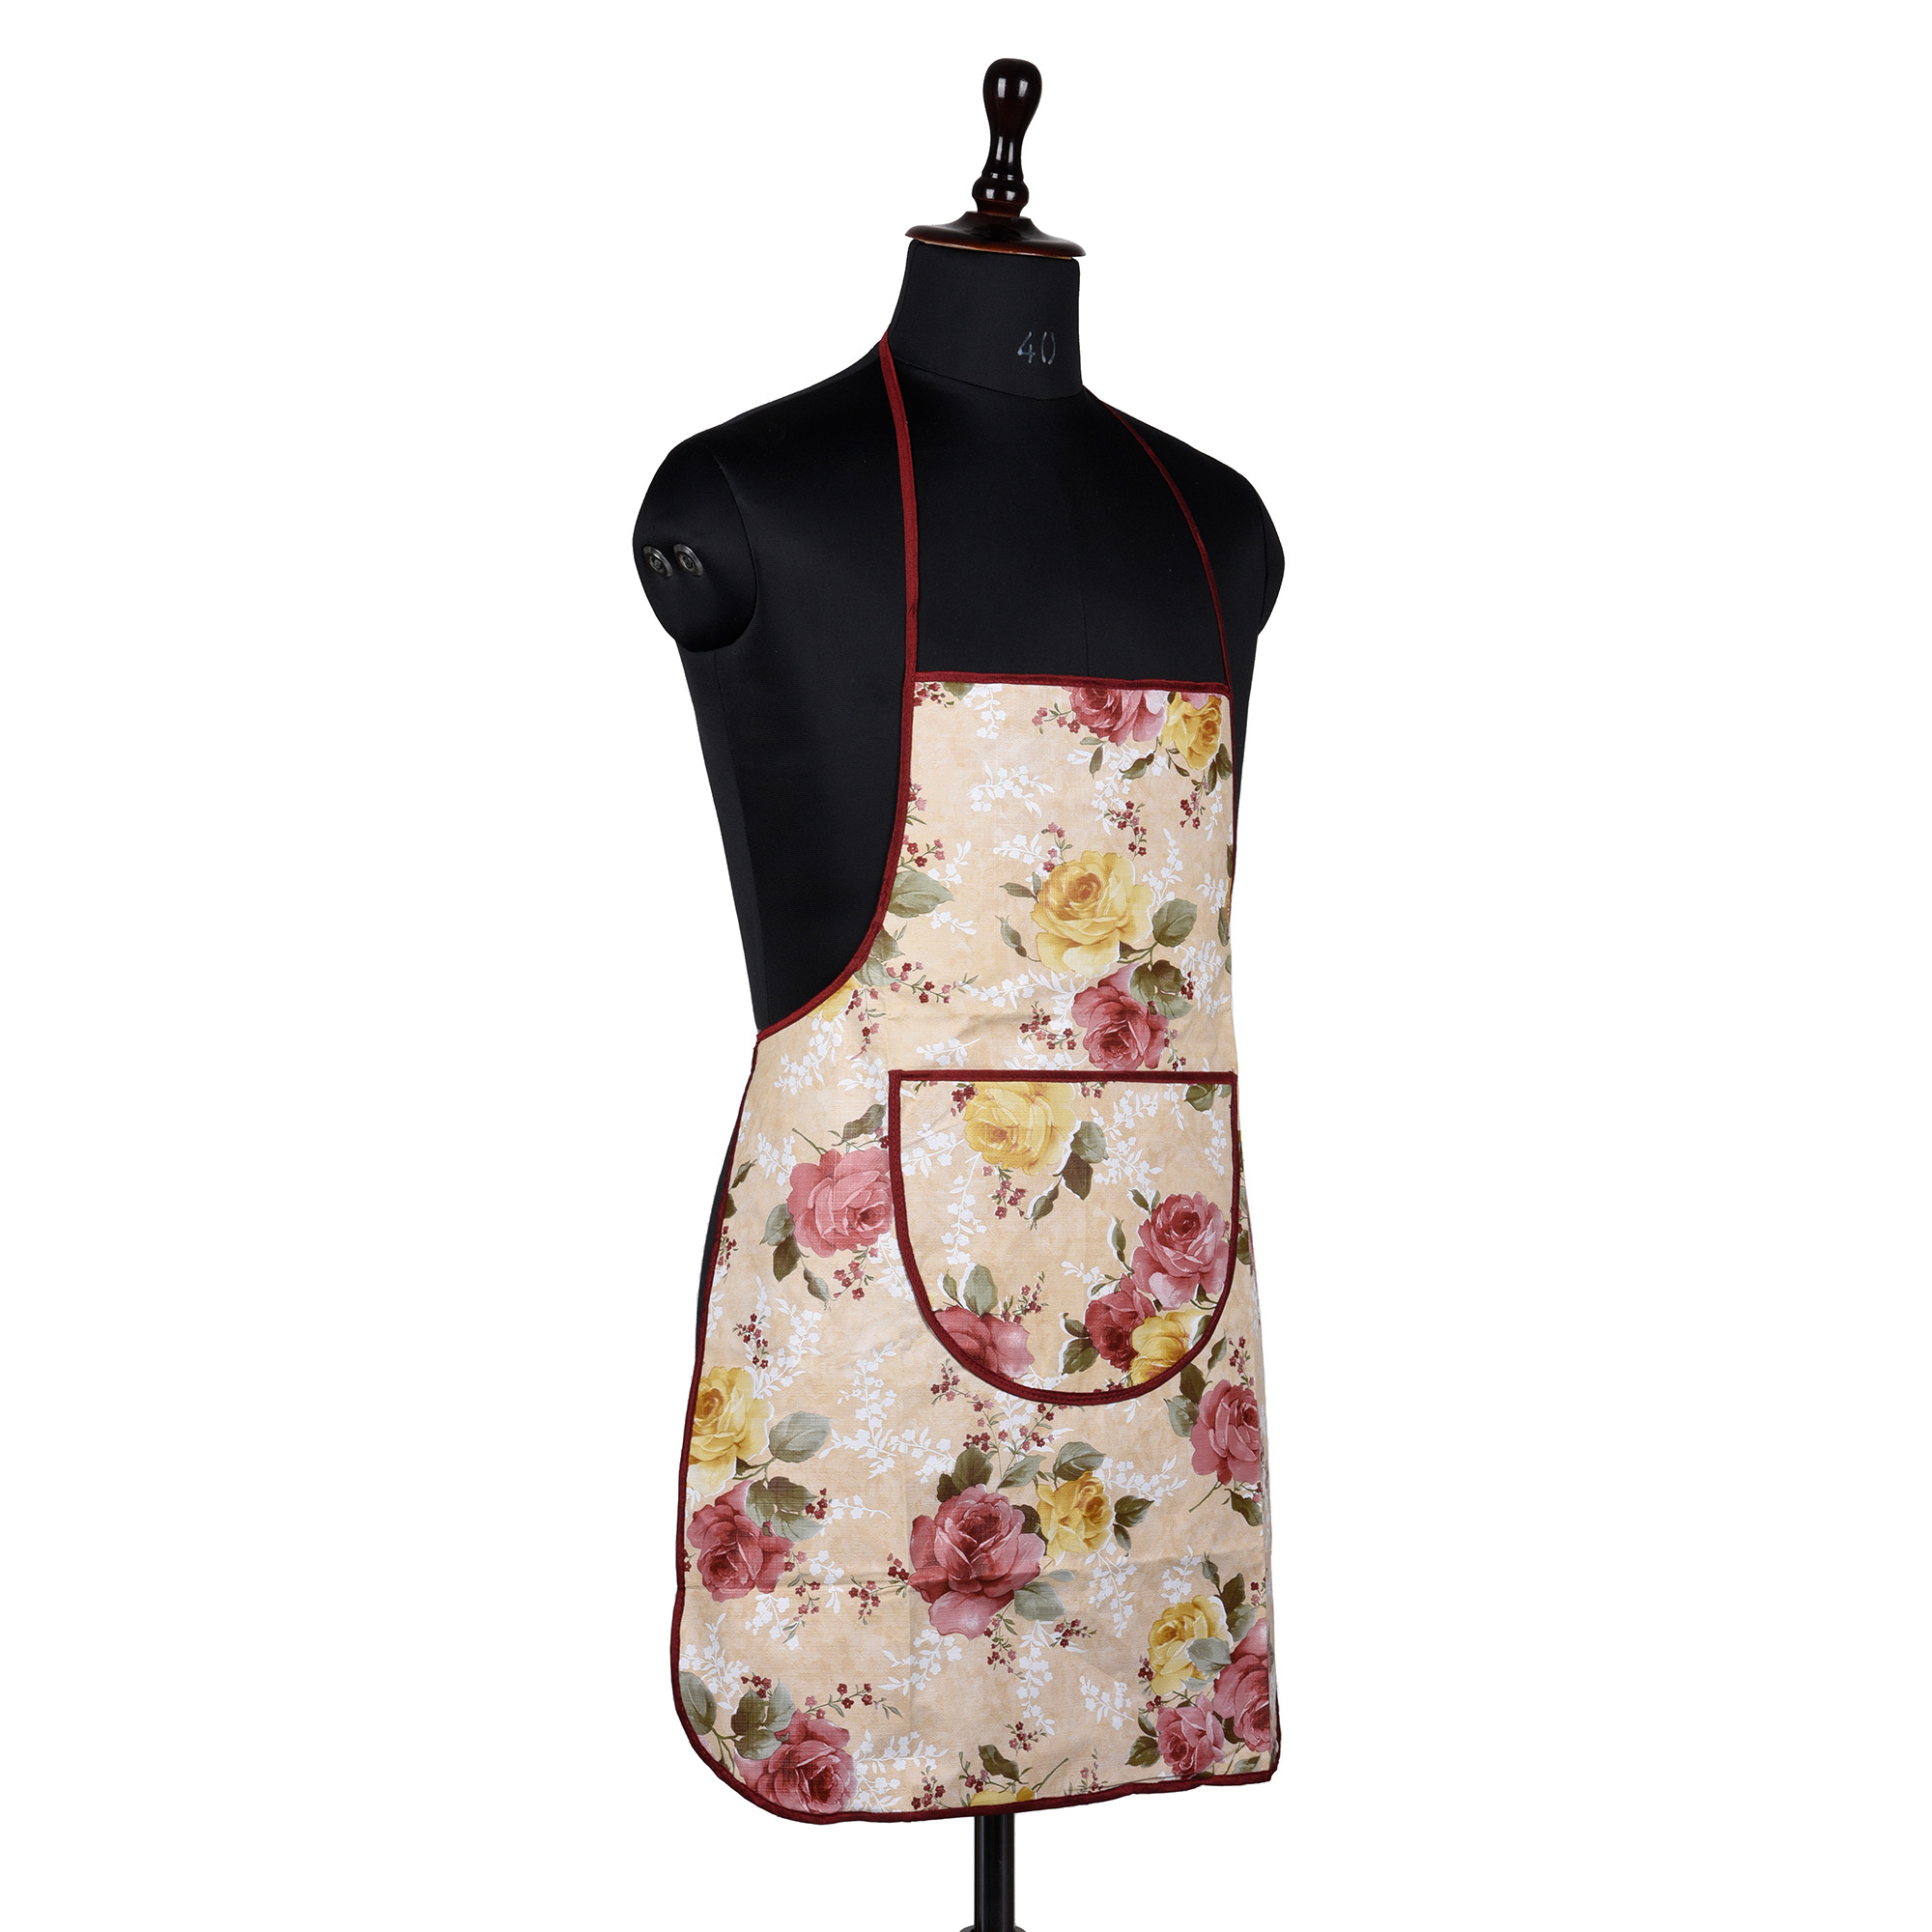 Kuber Industries Apron | PVC Cooking Kitchen Apron | Apron for Restaurent | Flower Apron for Housewife | Chef Apron with Ties | Center Pocket Apron | Beige